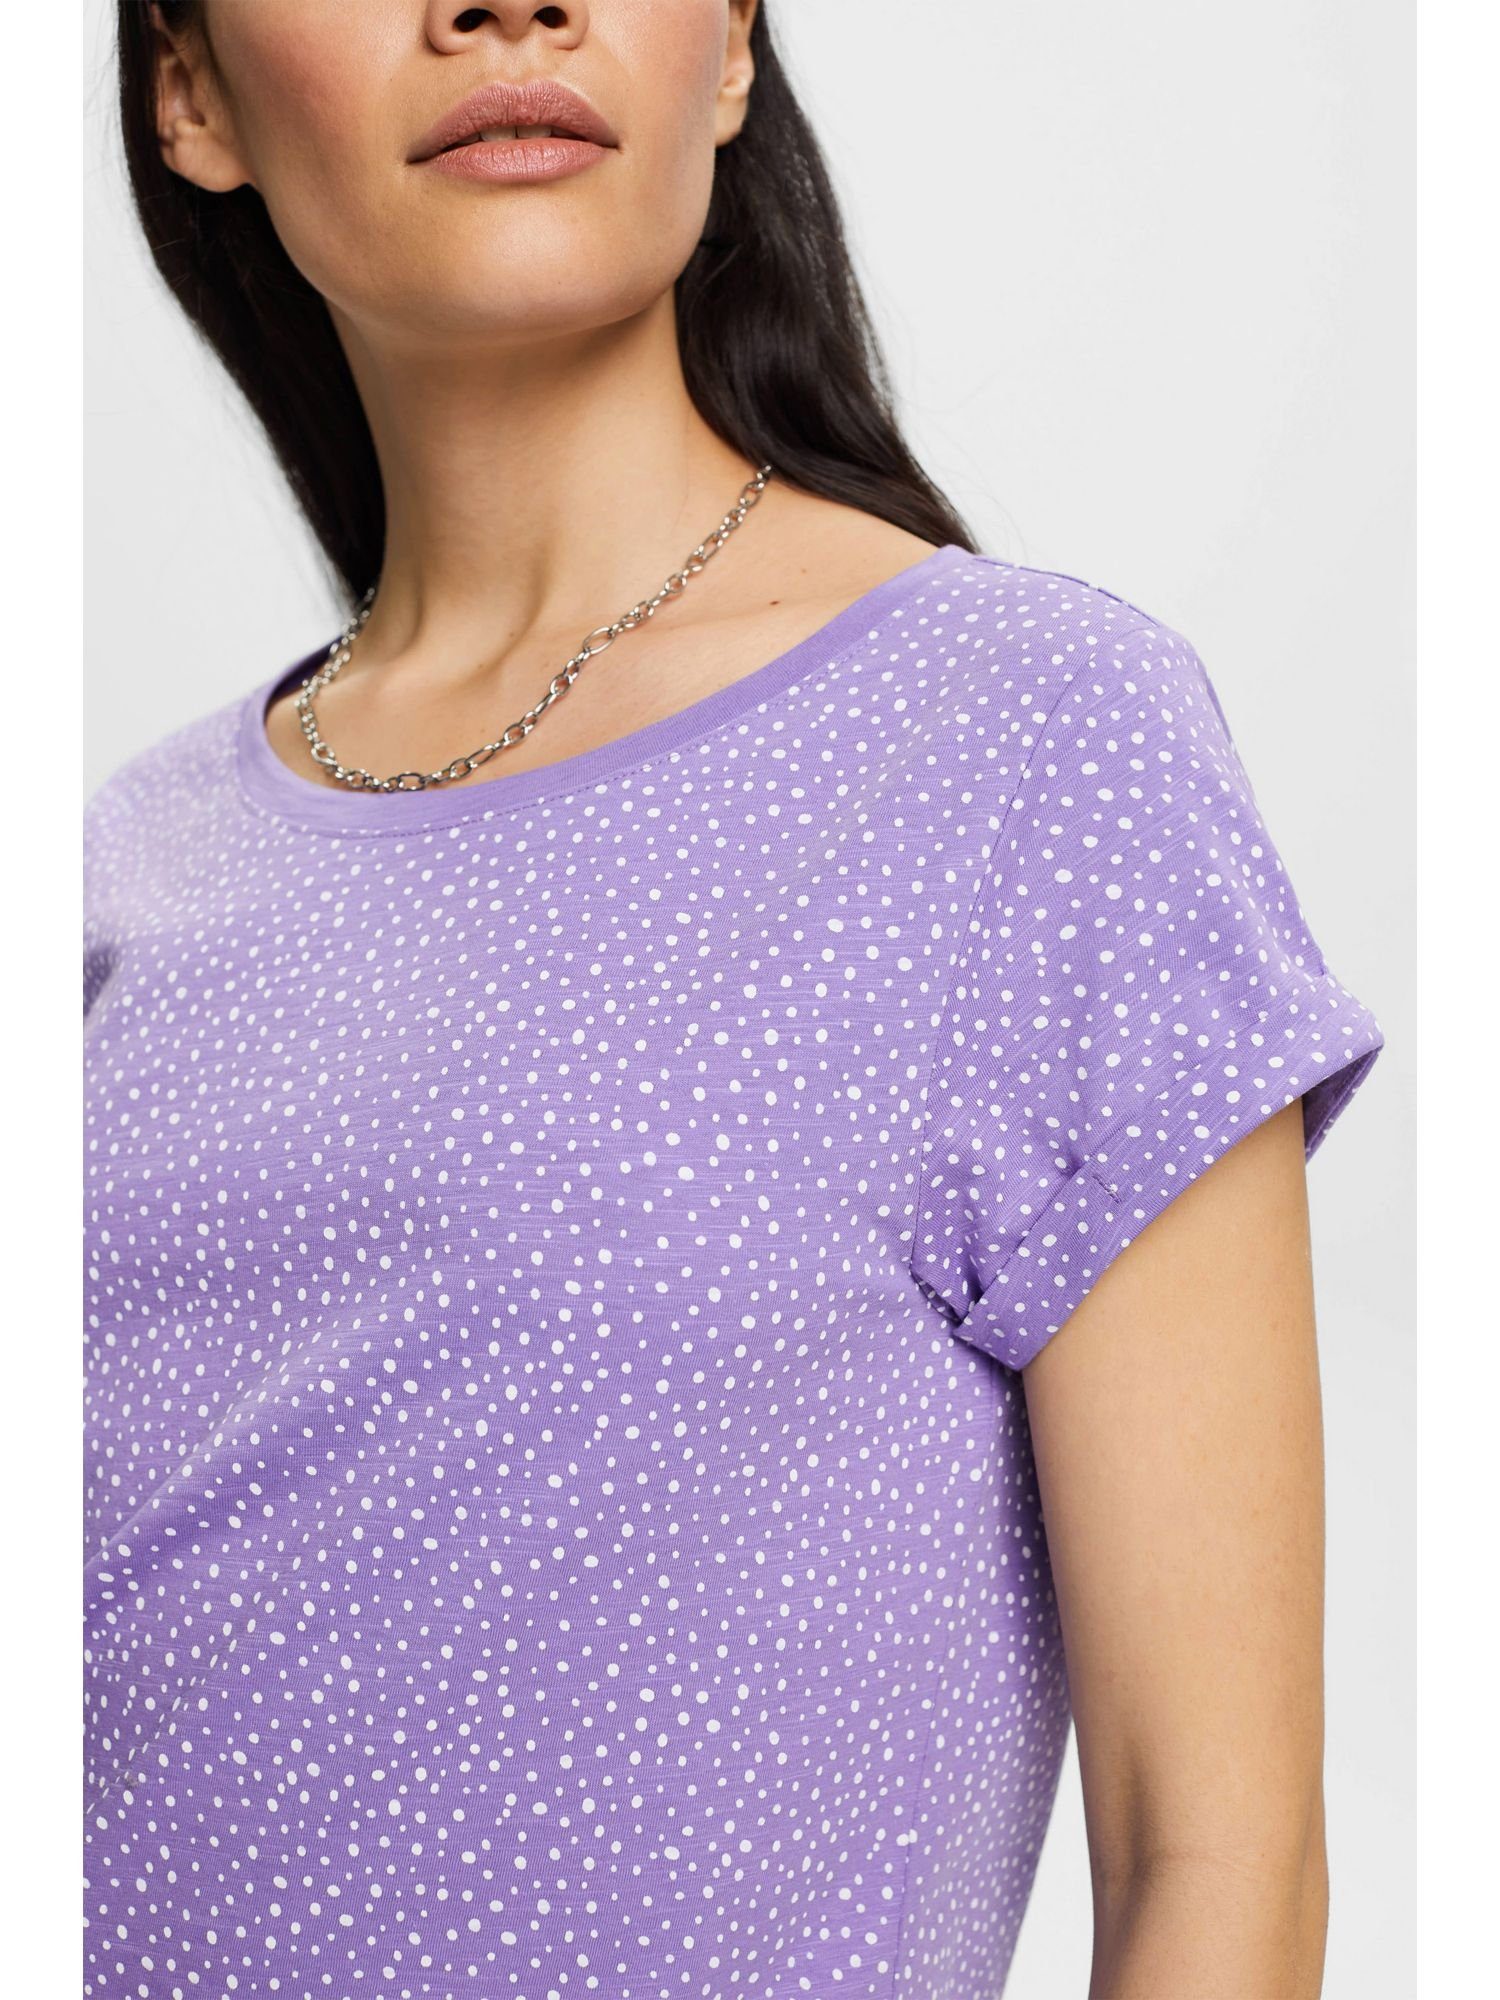 T-Shirt PURPLE mit by Esprit Allover-Muster T-Shirt (1-tlg) edc